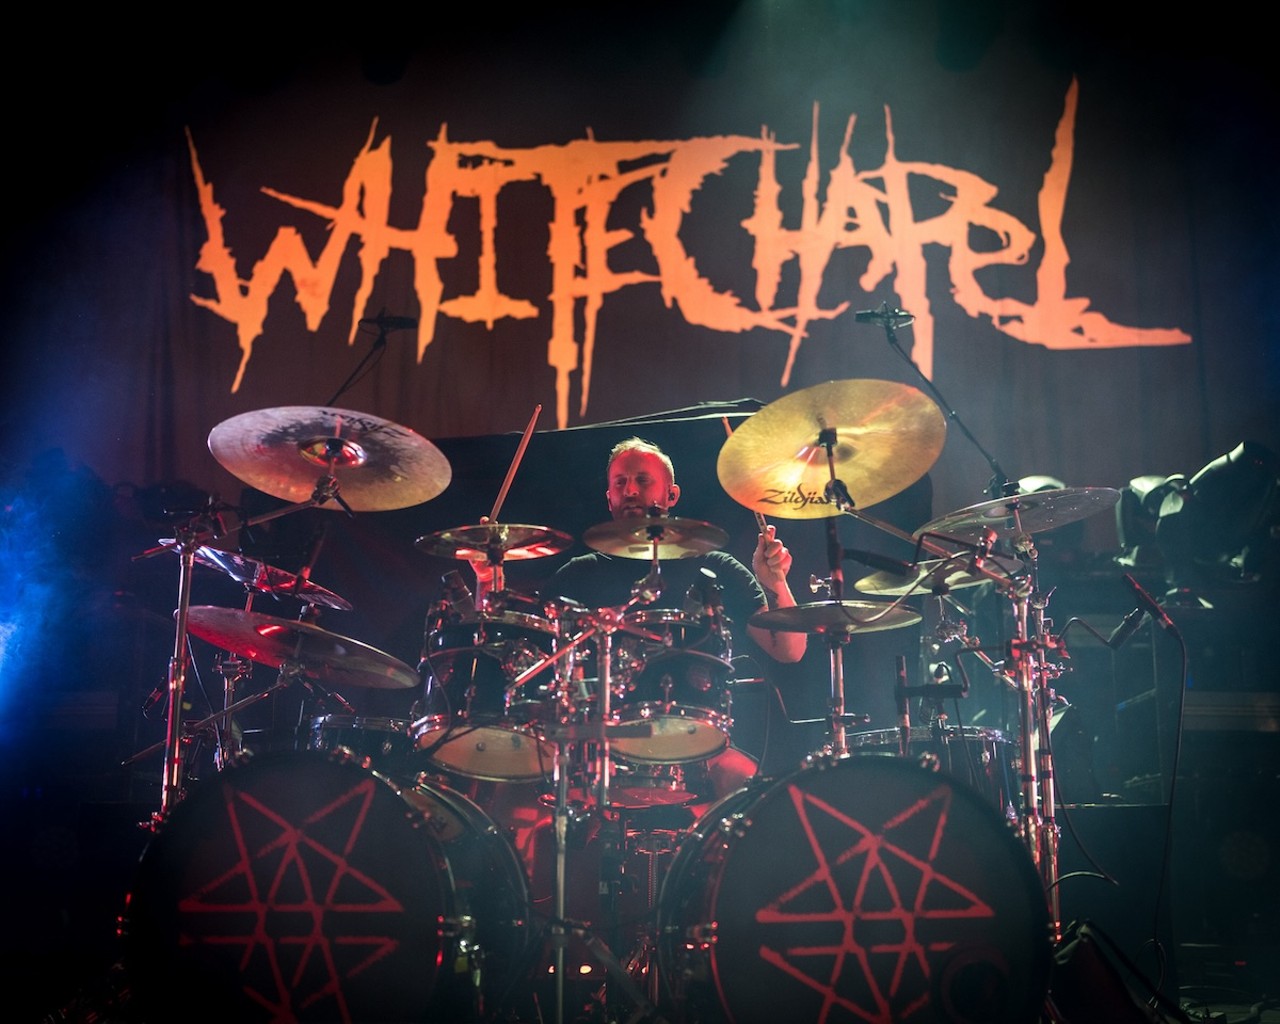 Whitechapel performing at the Andrew J Brady Music Center on Dec. 6, 2023